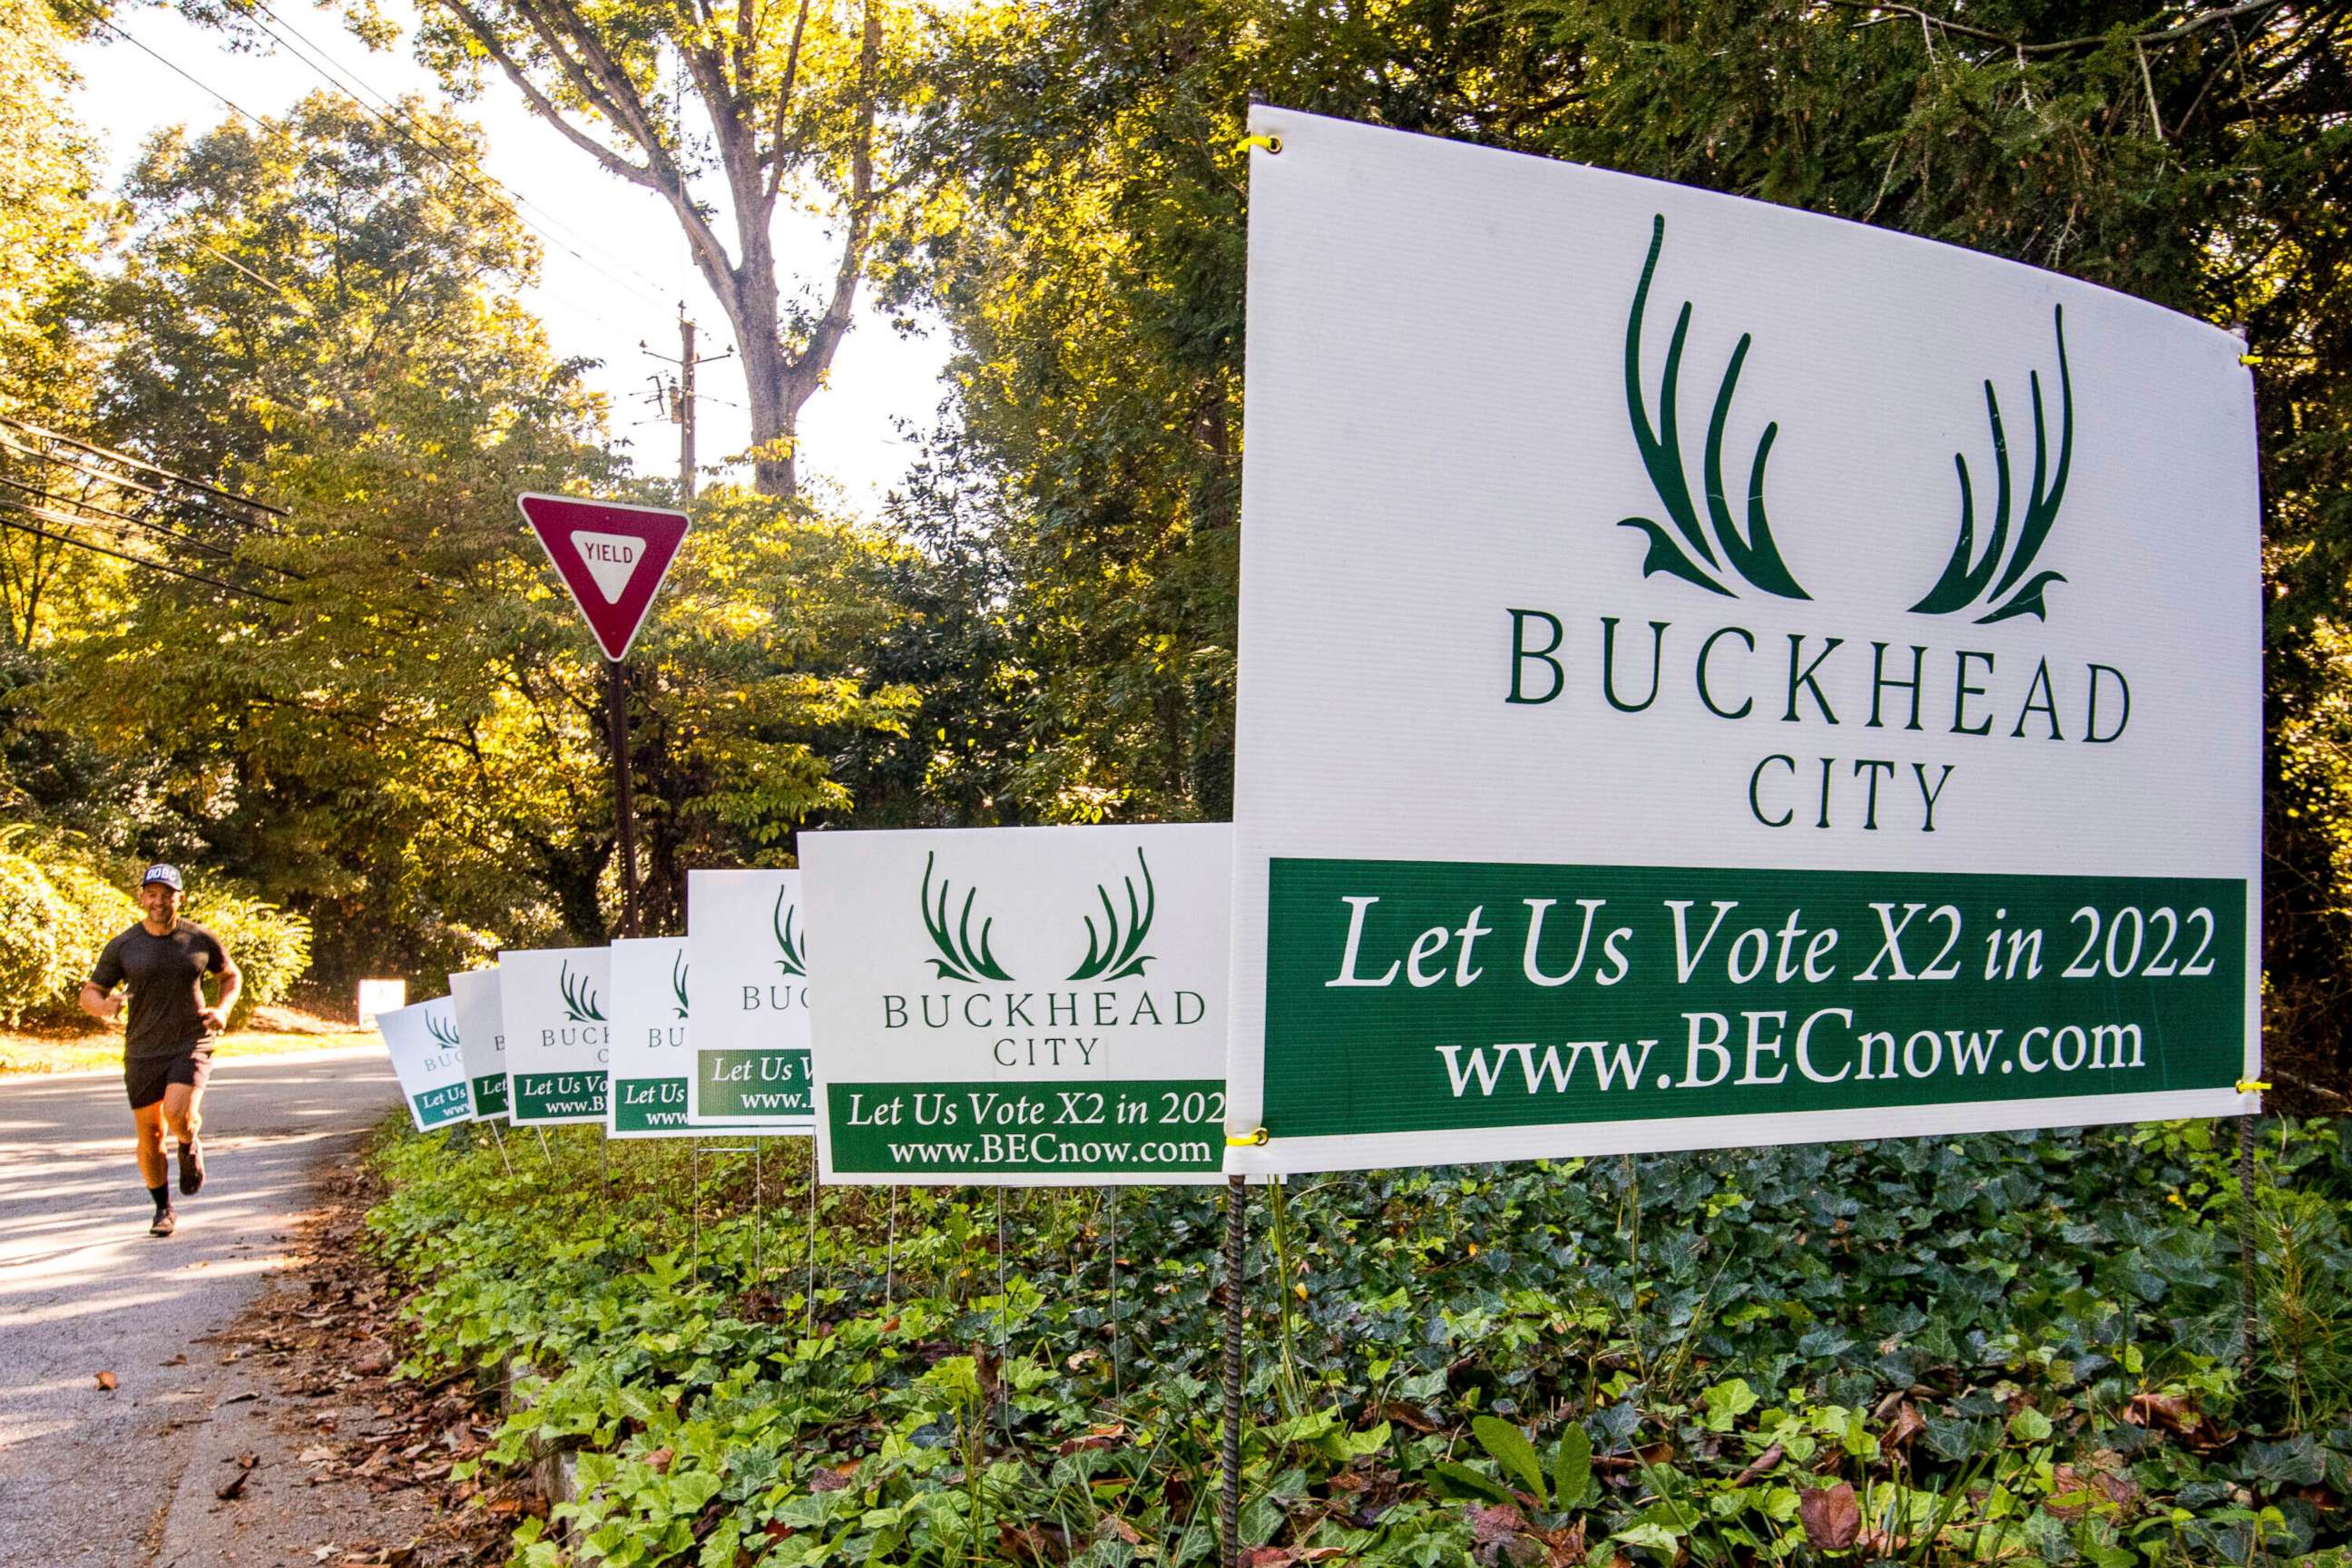 PHOTO: Yard signs supporting the grassroots initiative to incorporate Buckhead, an Atlanta neighborhood plagued by a recent crime wave, as a distinct city have been popping up like mushrooms, pictured on Monday, Sept. 27, 2021, in Atlanta.